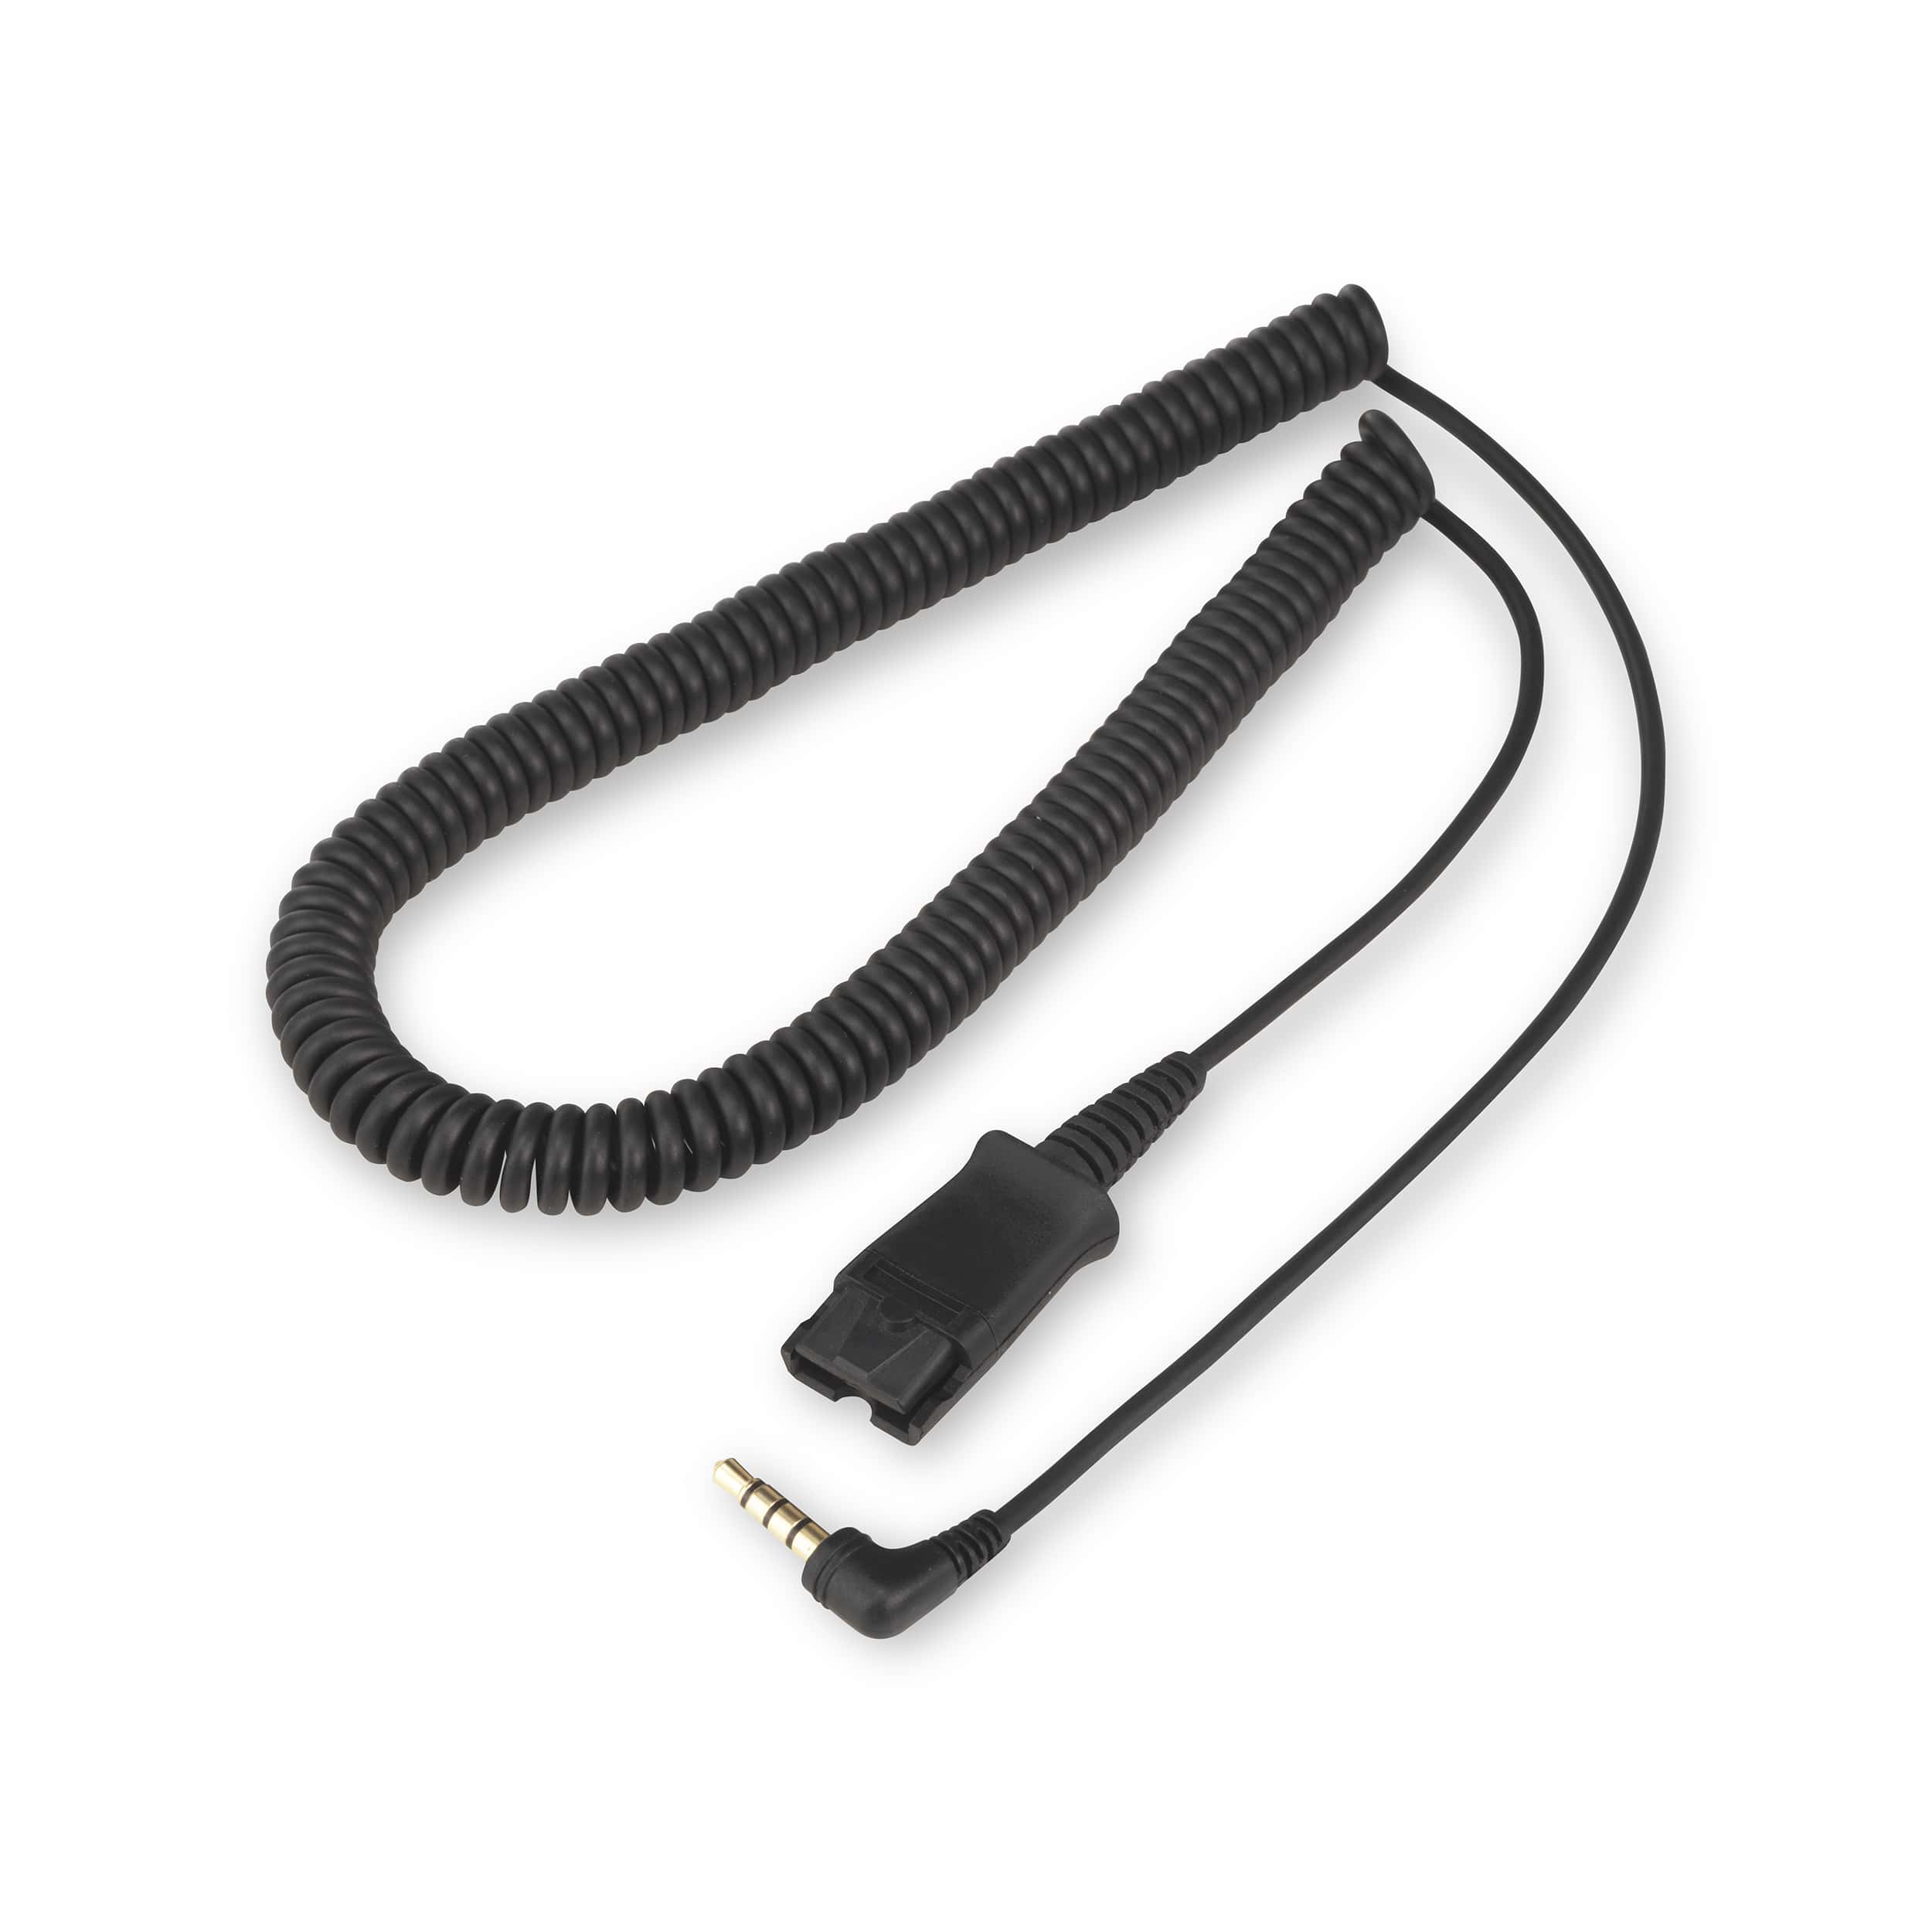 3.5mm Jack Adapter Cable for A100 Headsets